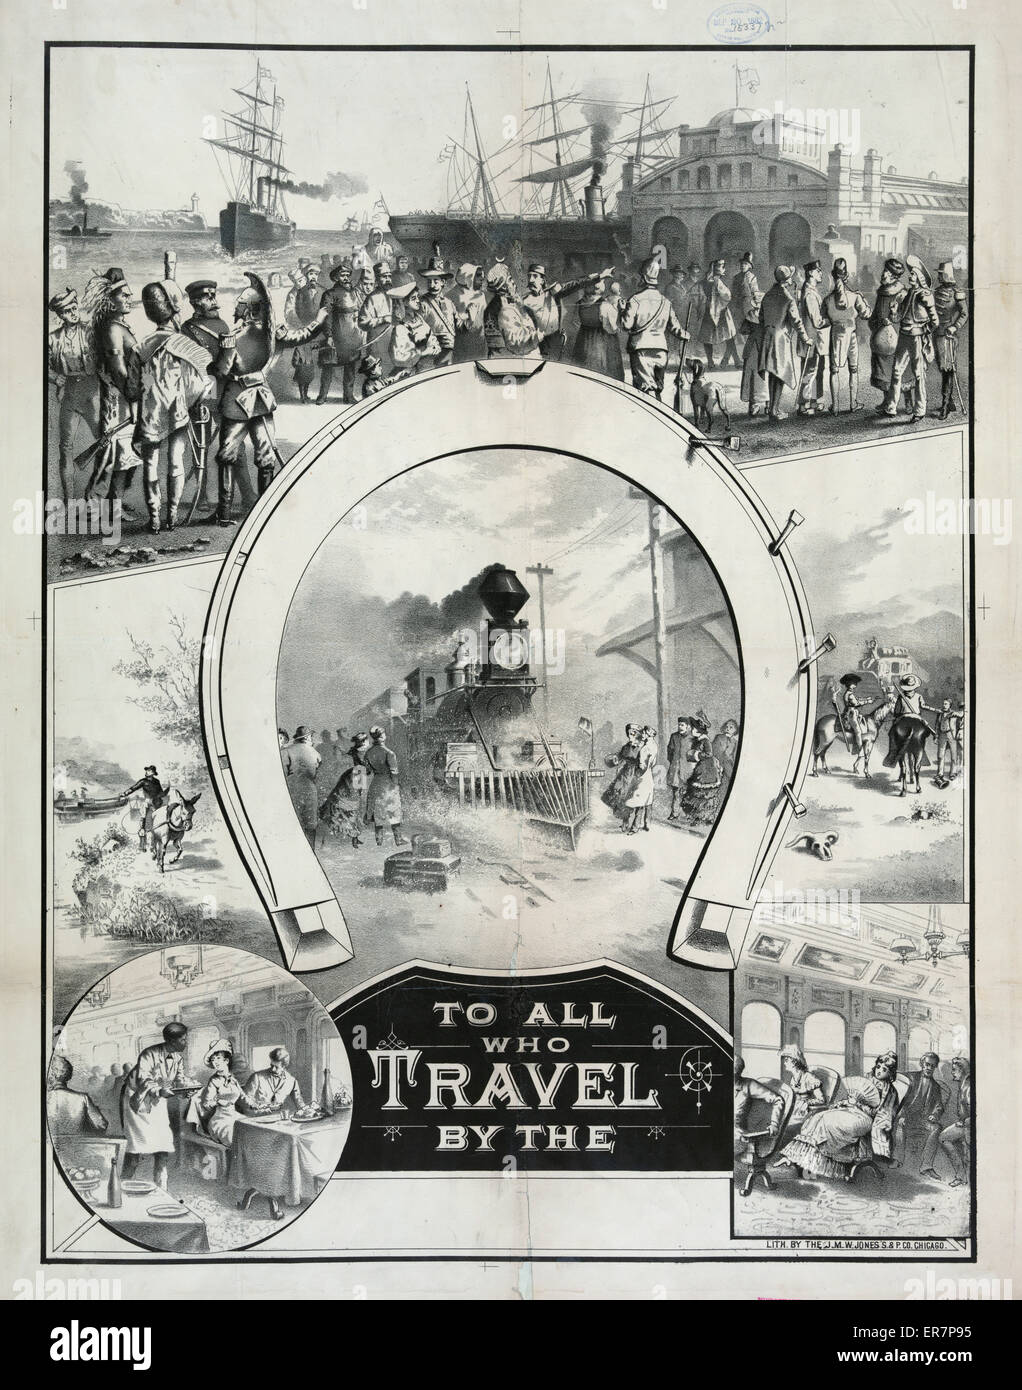 To all who travel by the. Print showing, around the outer rim of a horseshoe, immigrants from many nations arriving by steamship, a man with a mule pulling a canal boat, two bandits on horseback robbing travelers, and within the horseshoe, a locomotive ar Stock Photo